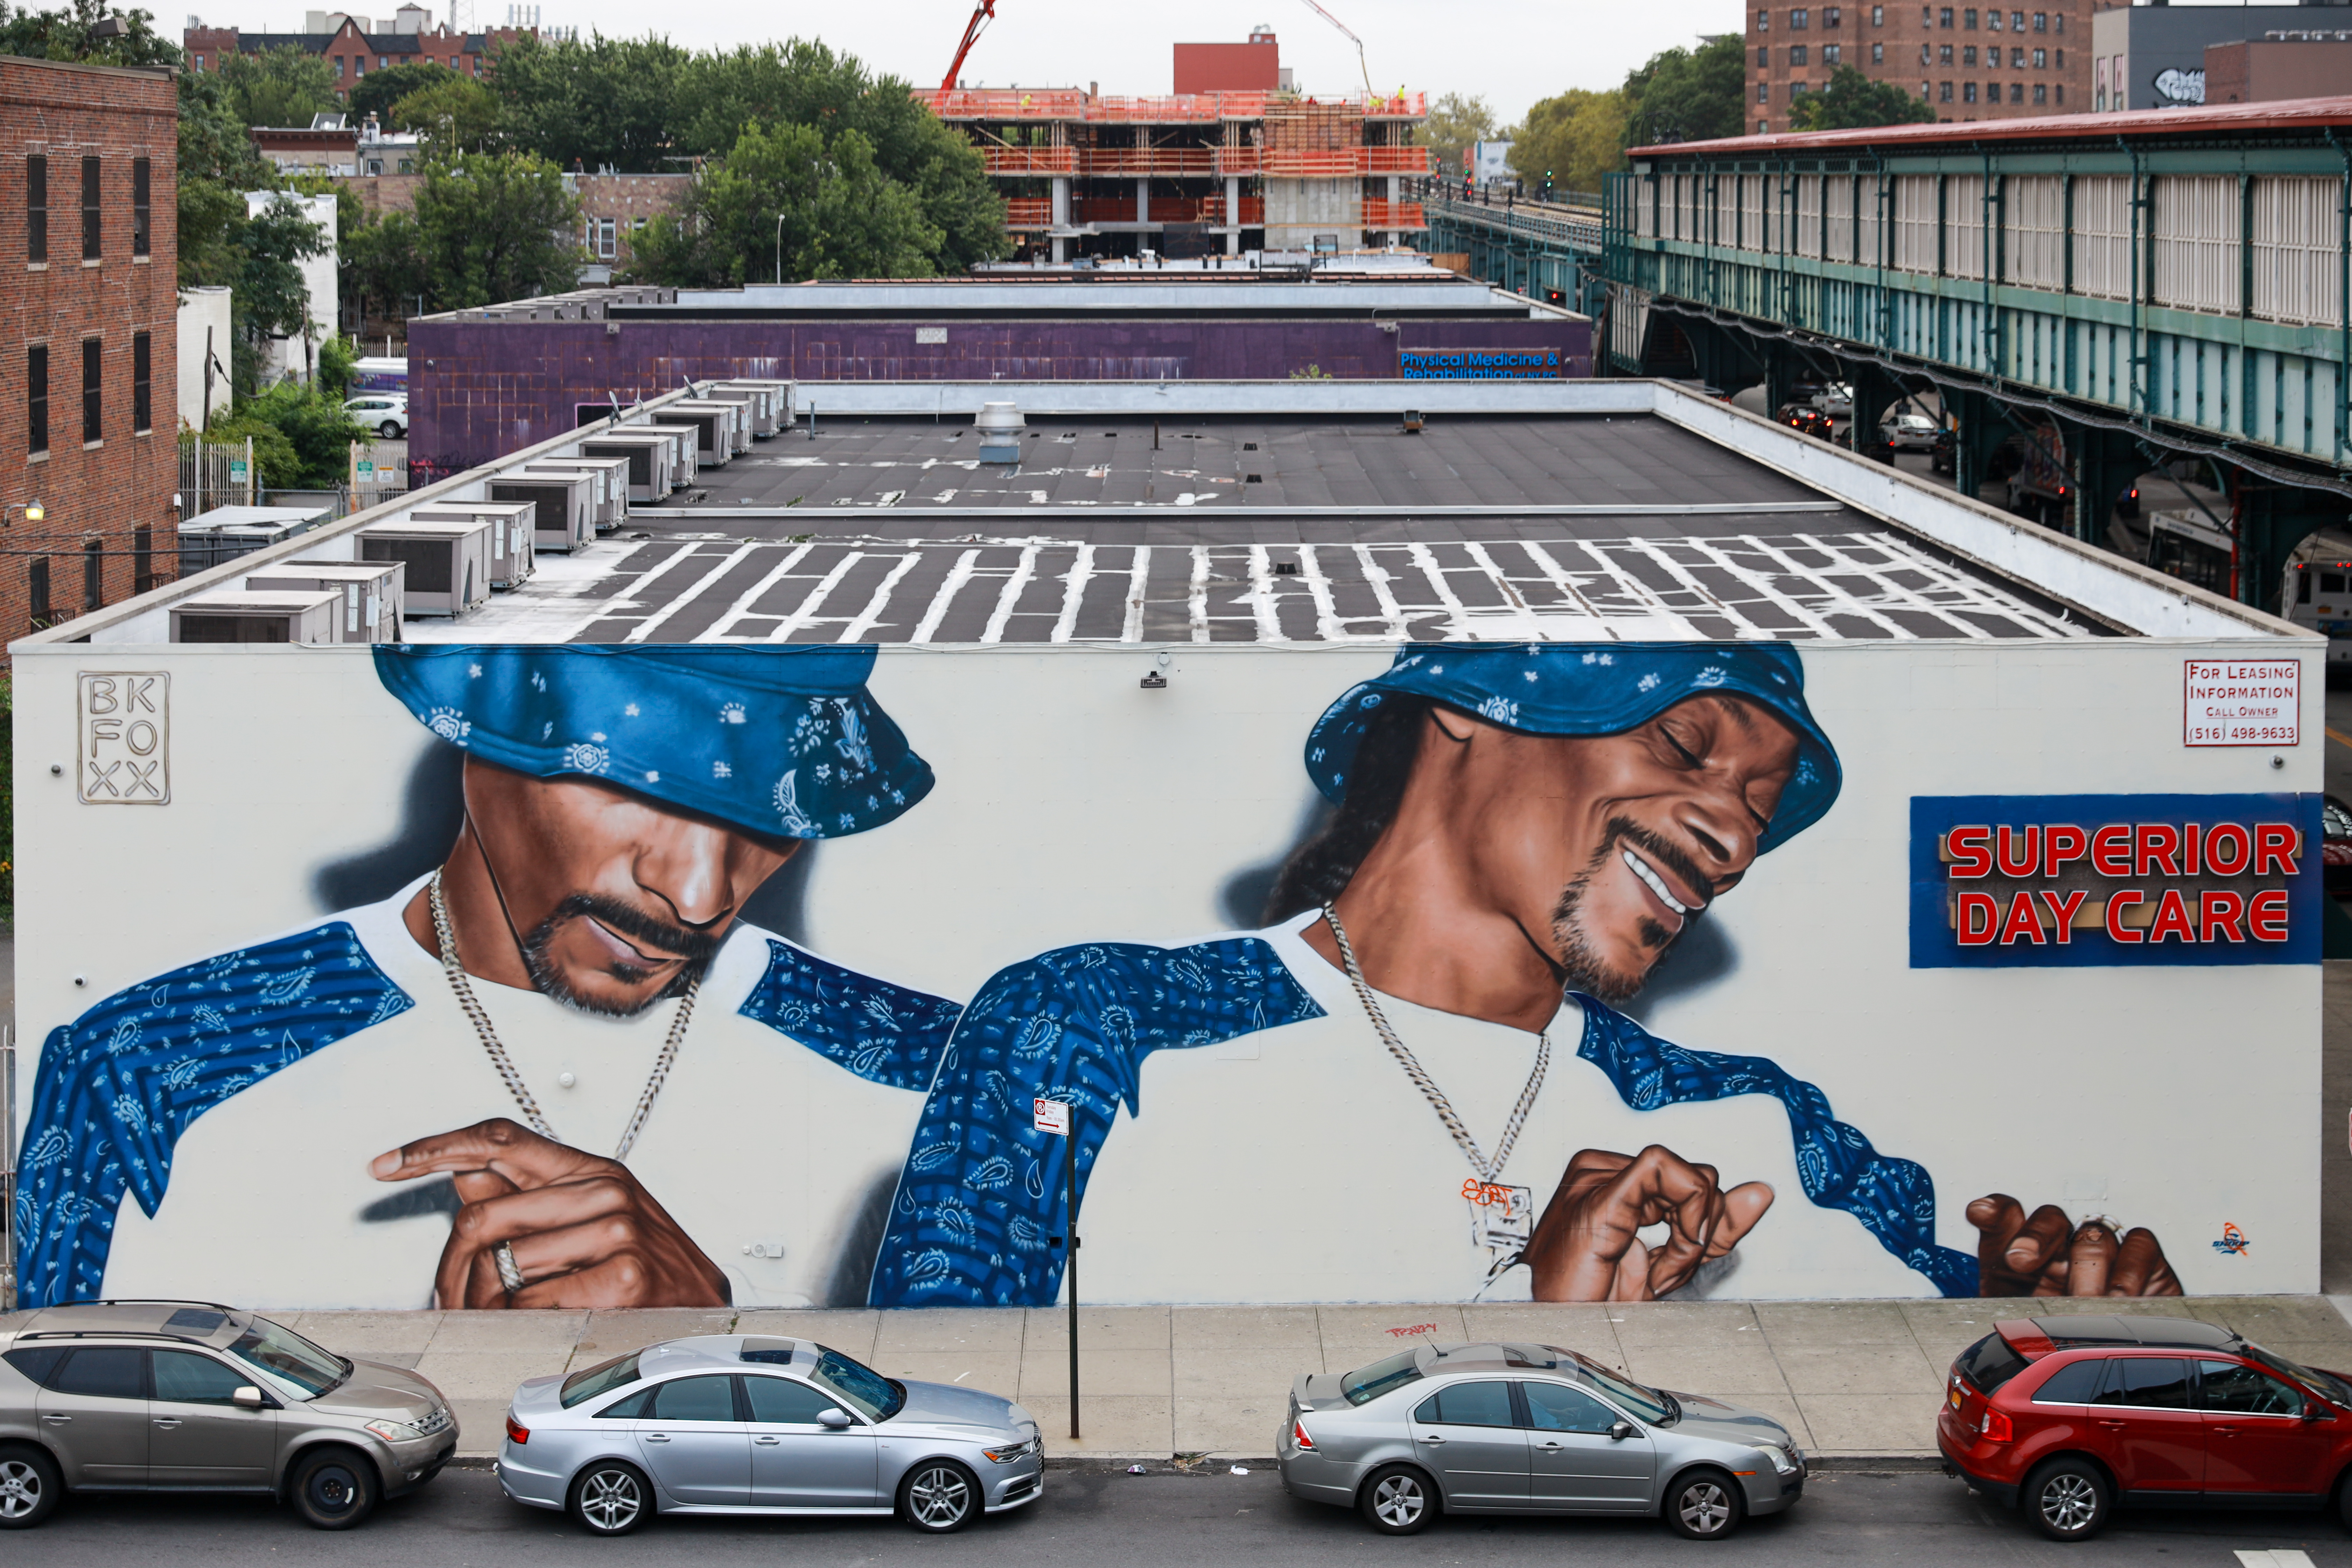 <b>Snoop</b><br>Brooklyn, NY<br>Aug 2018<br>photo by @just_a_spectator